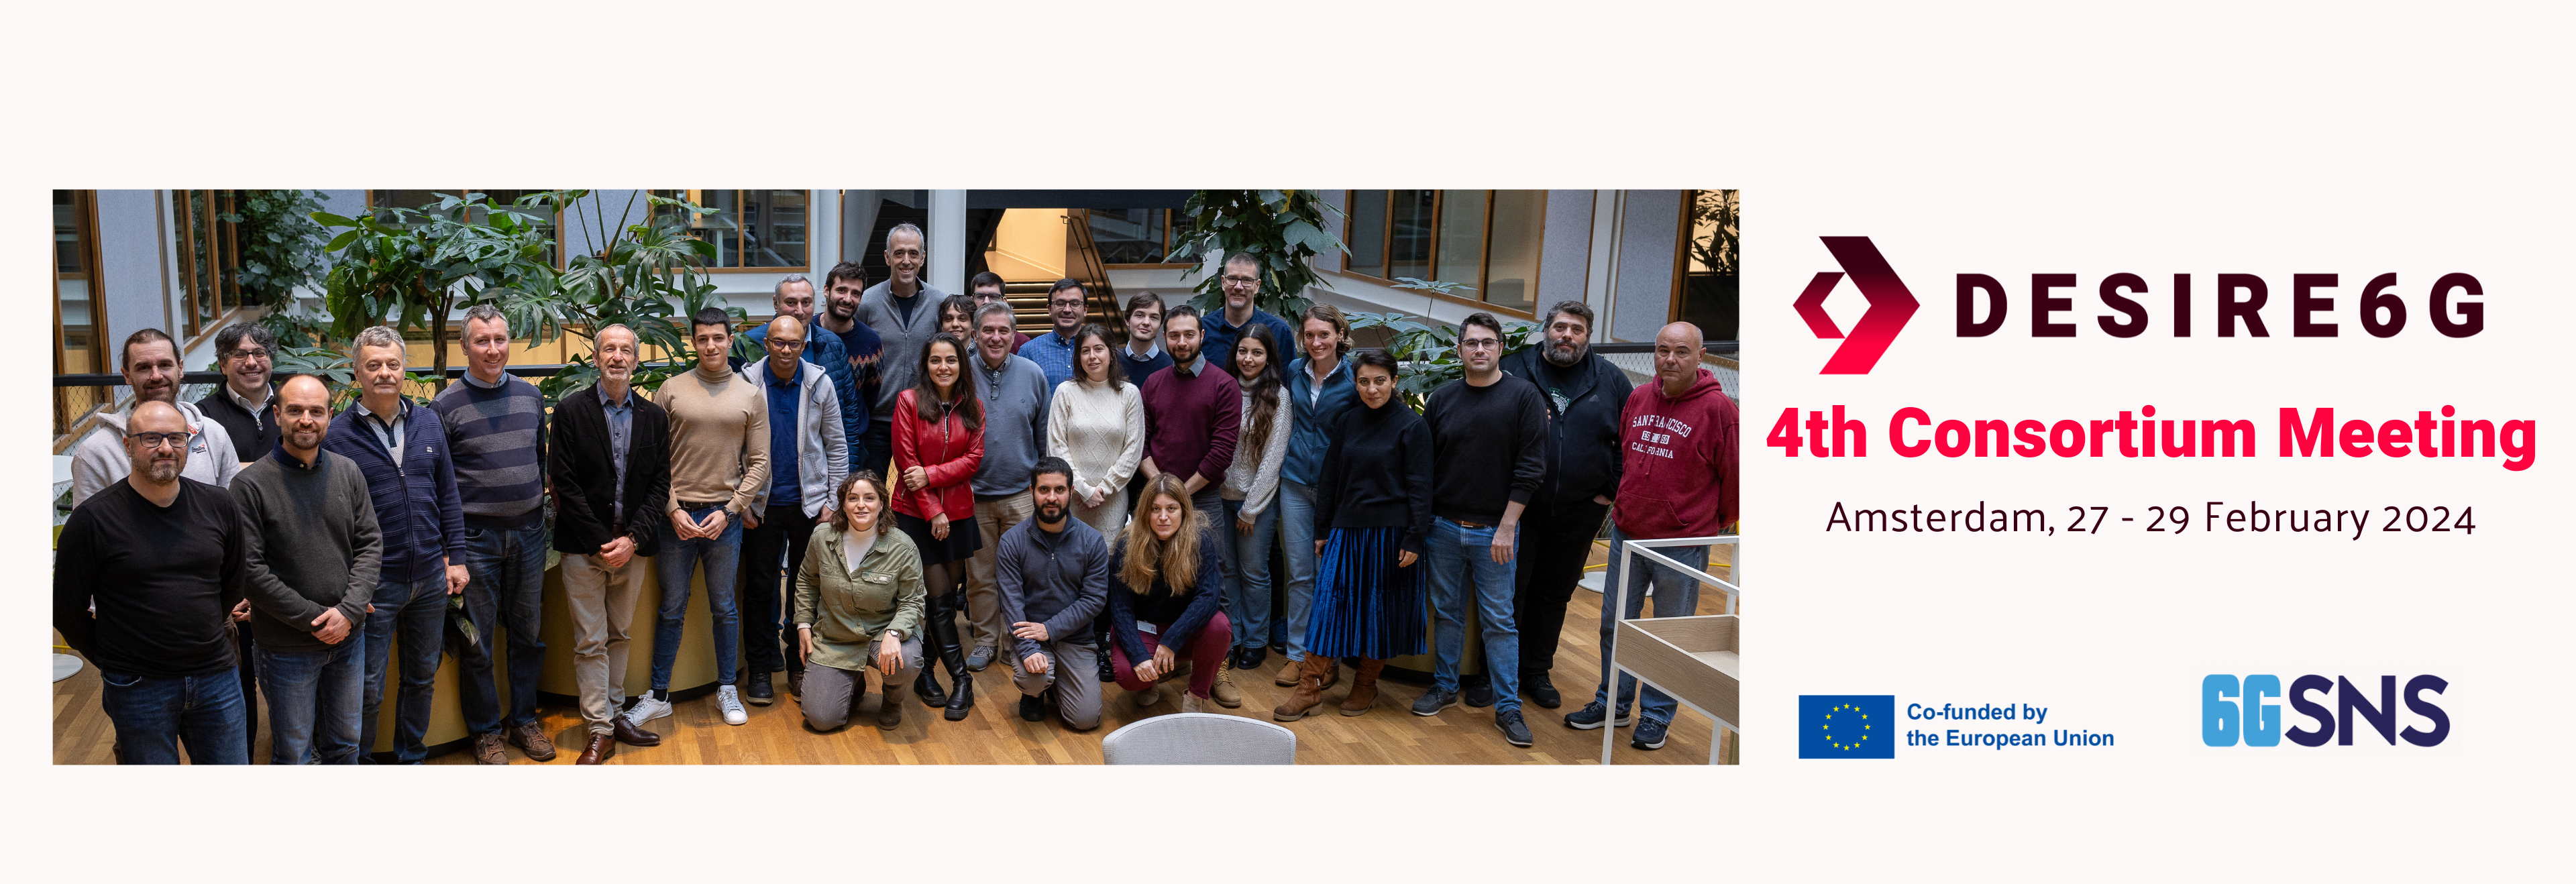 DESIRE6G meets in Amsterdam for the 4th Consortium meeting